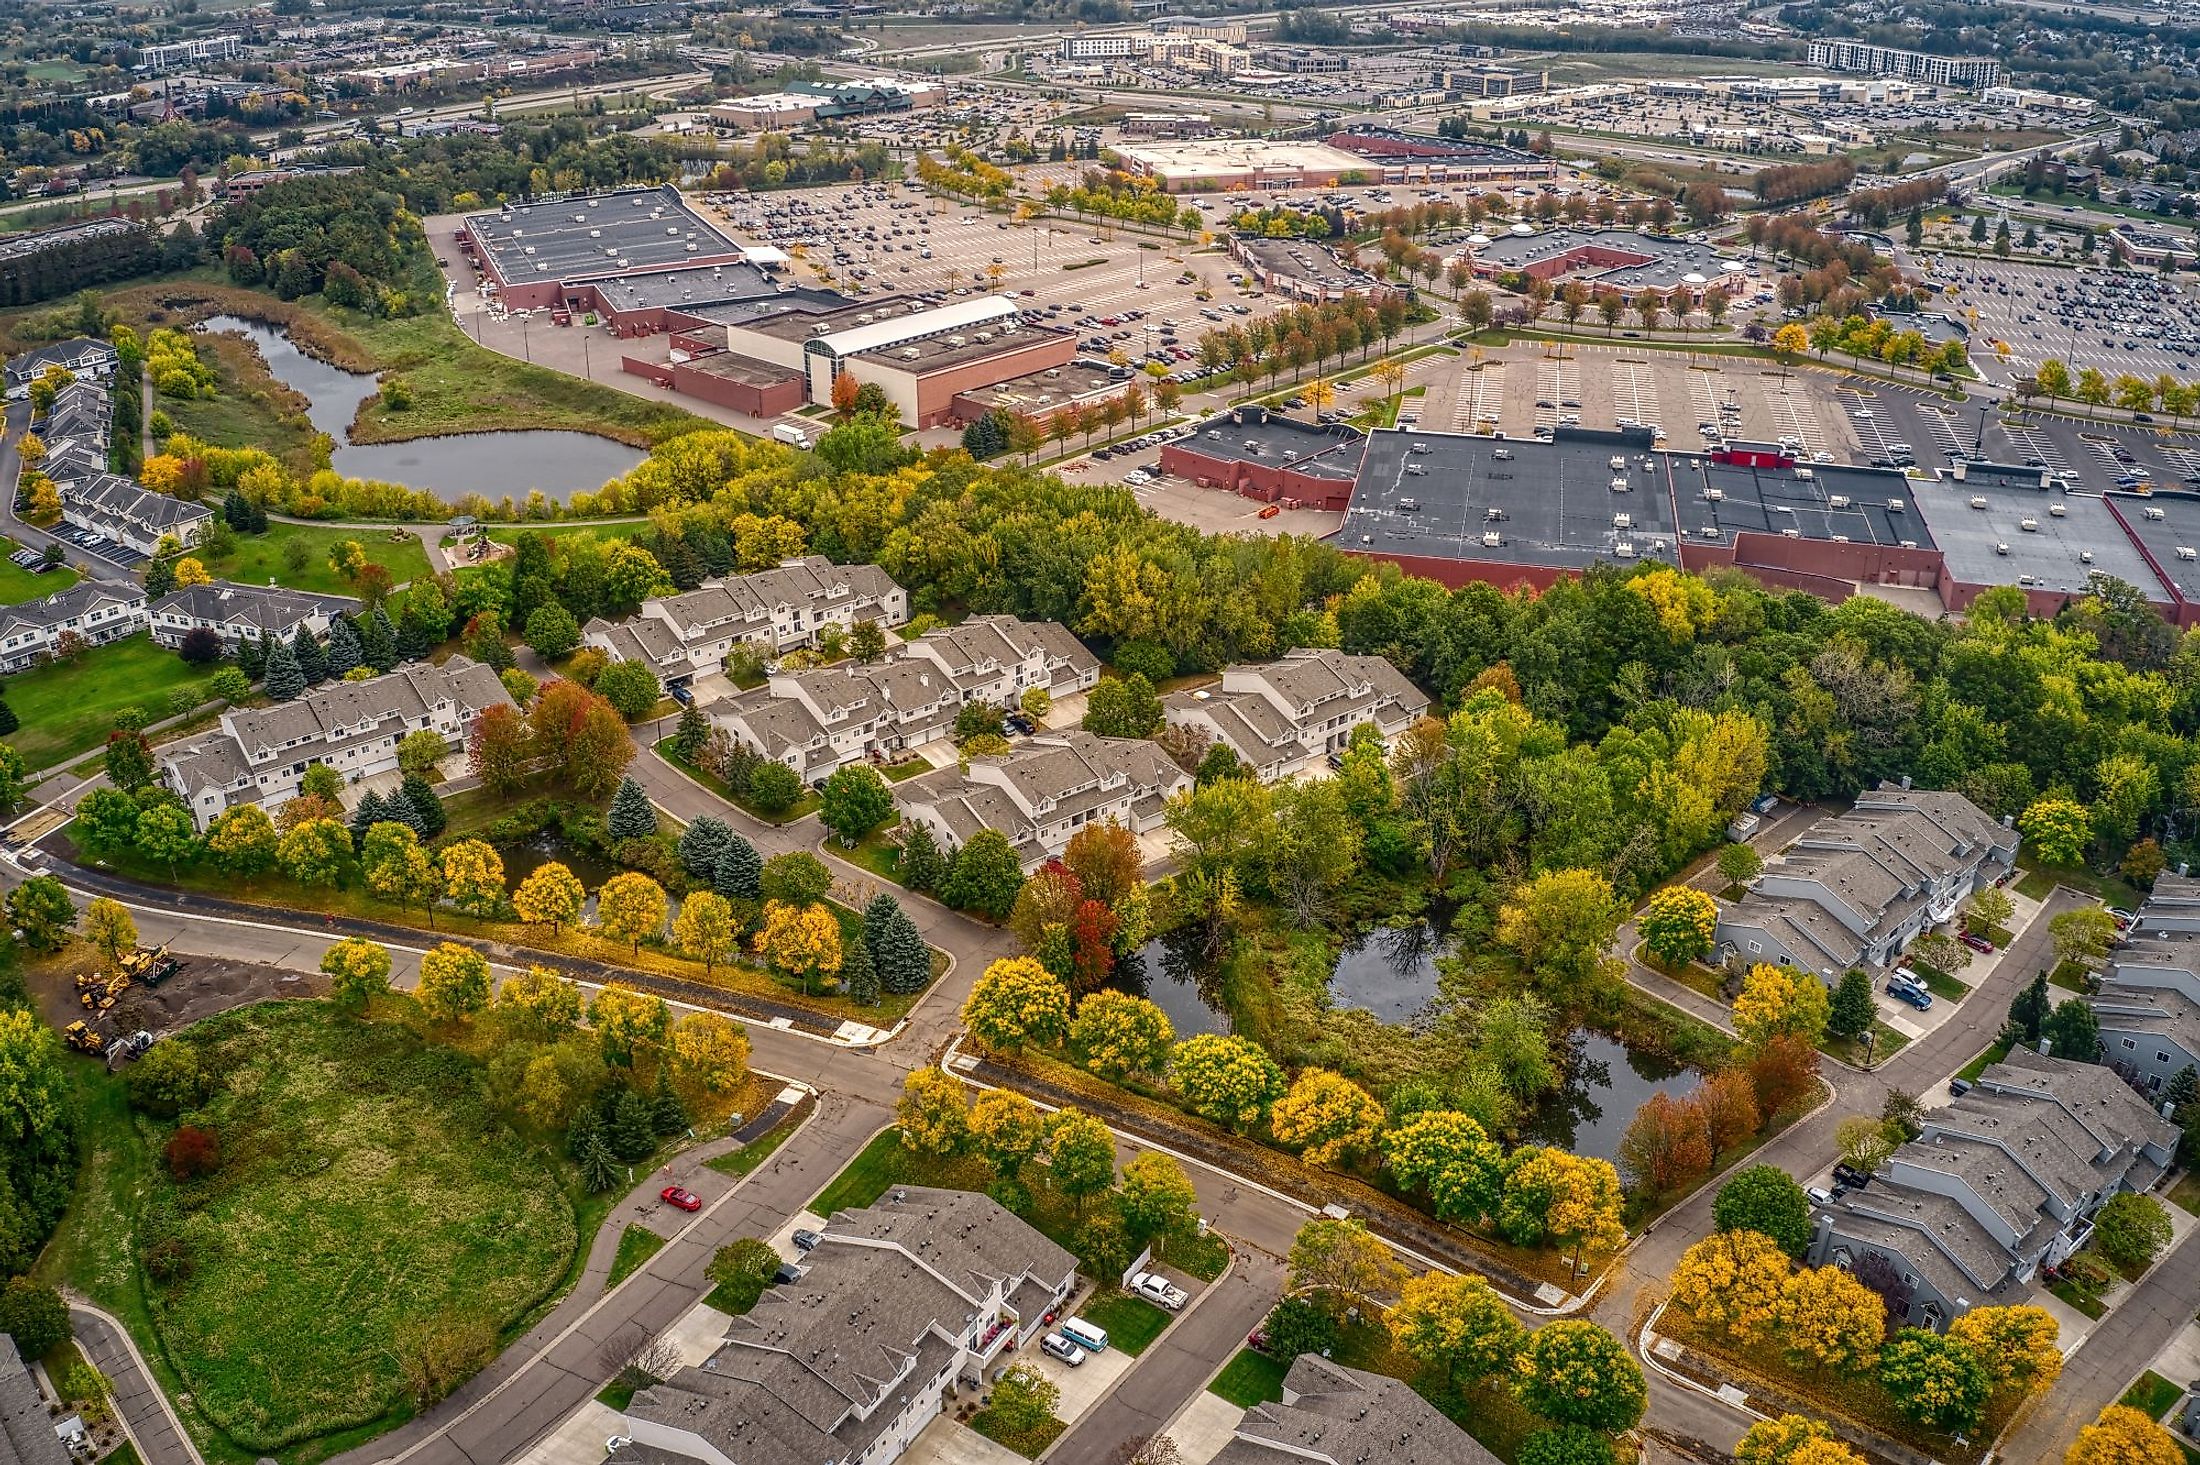 Aerial view of the twin cities suburb of Woodbury, Minnesota